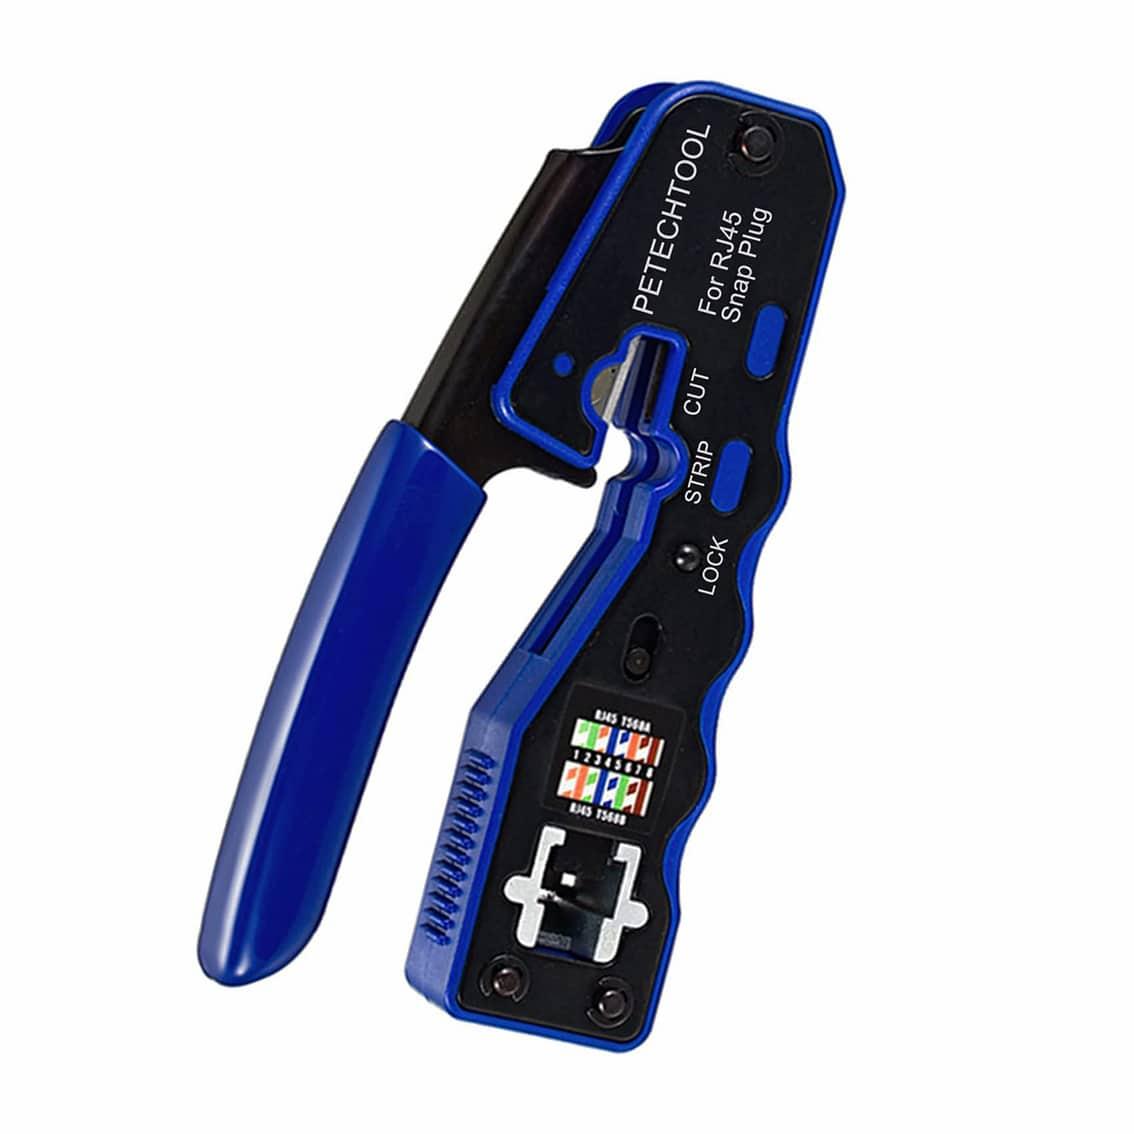 Product RJ45 Connection All in One Crimping Tool - CAT7 CAT6 CAT5 RJ11 RJ12 RJ45 - Phipps Electronics image